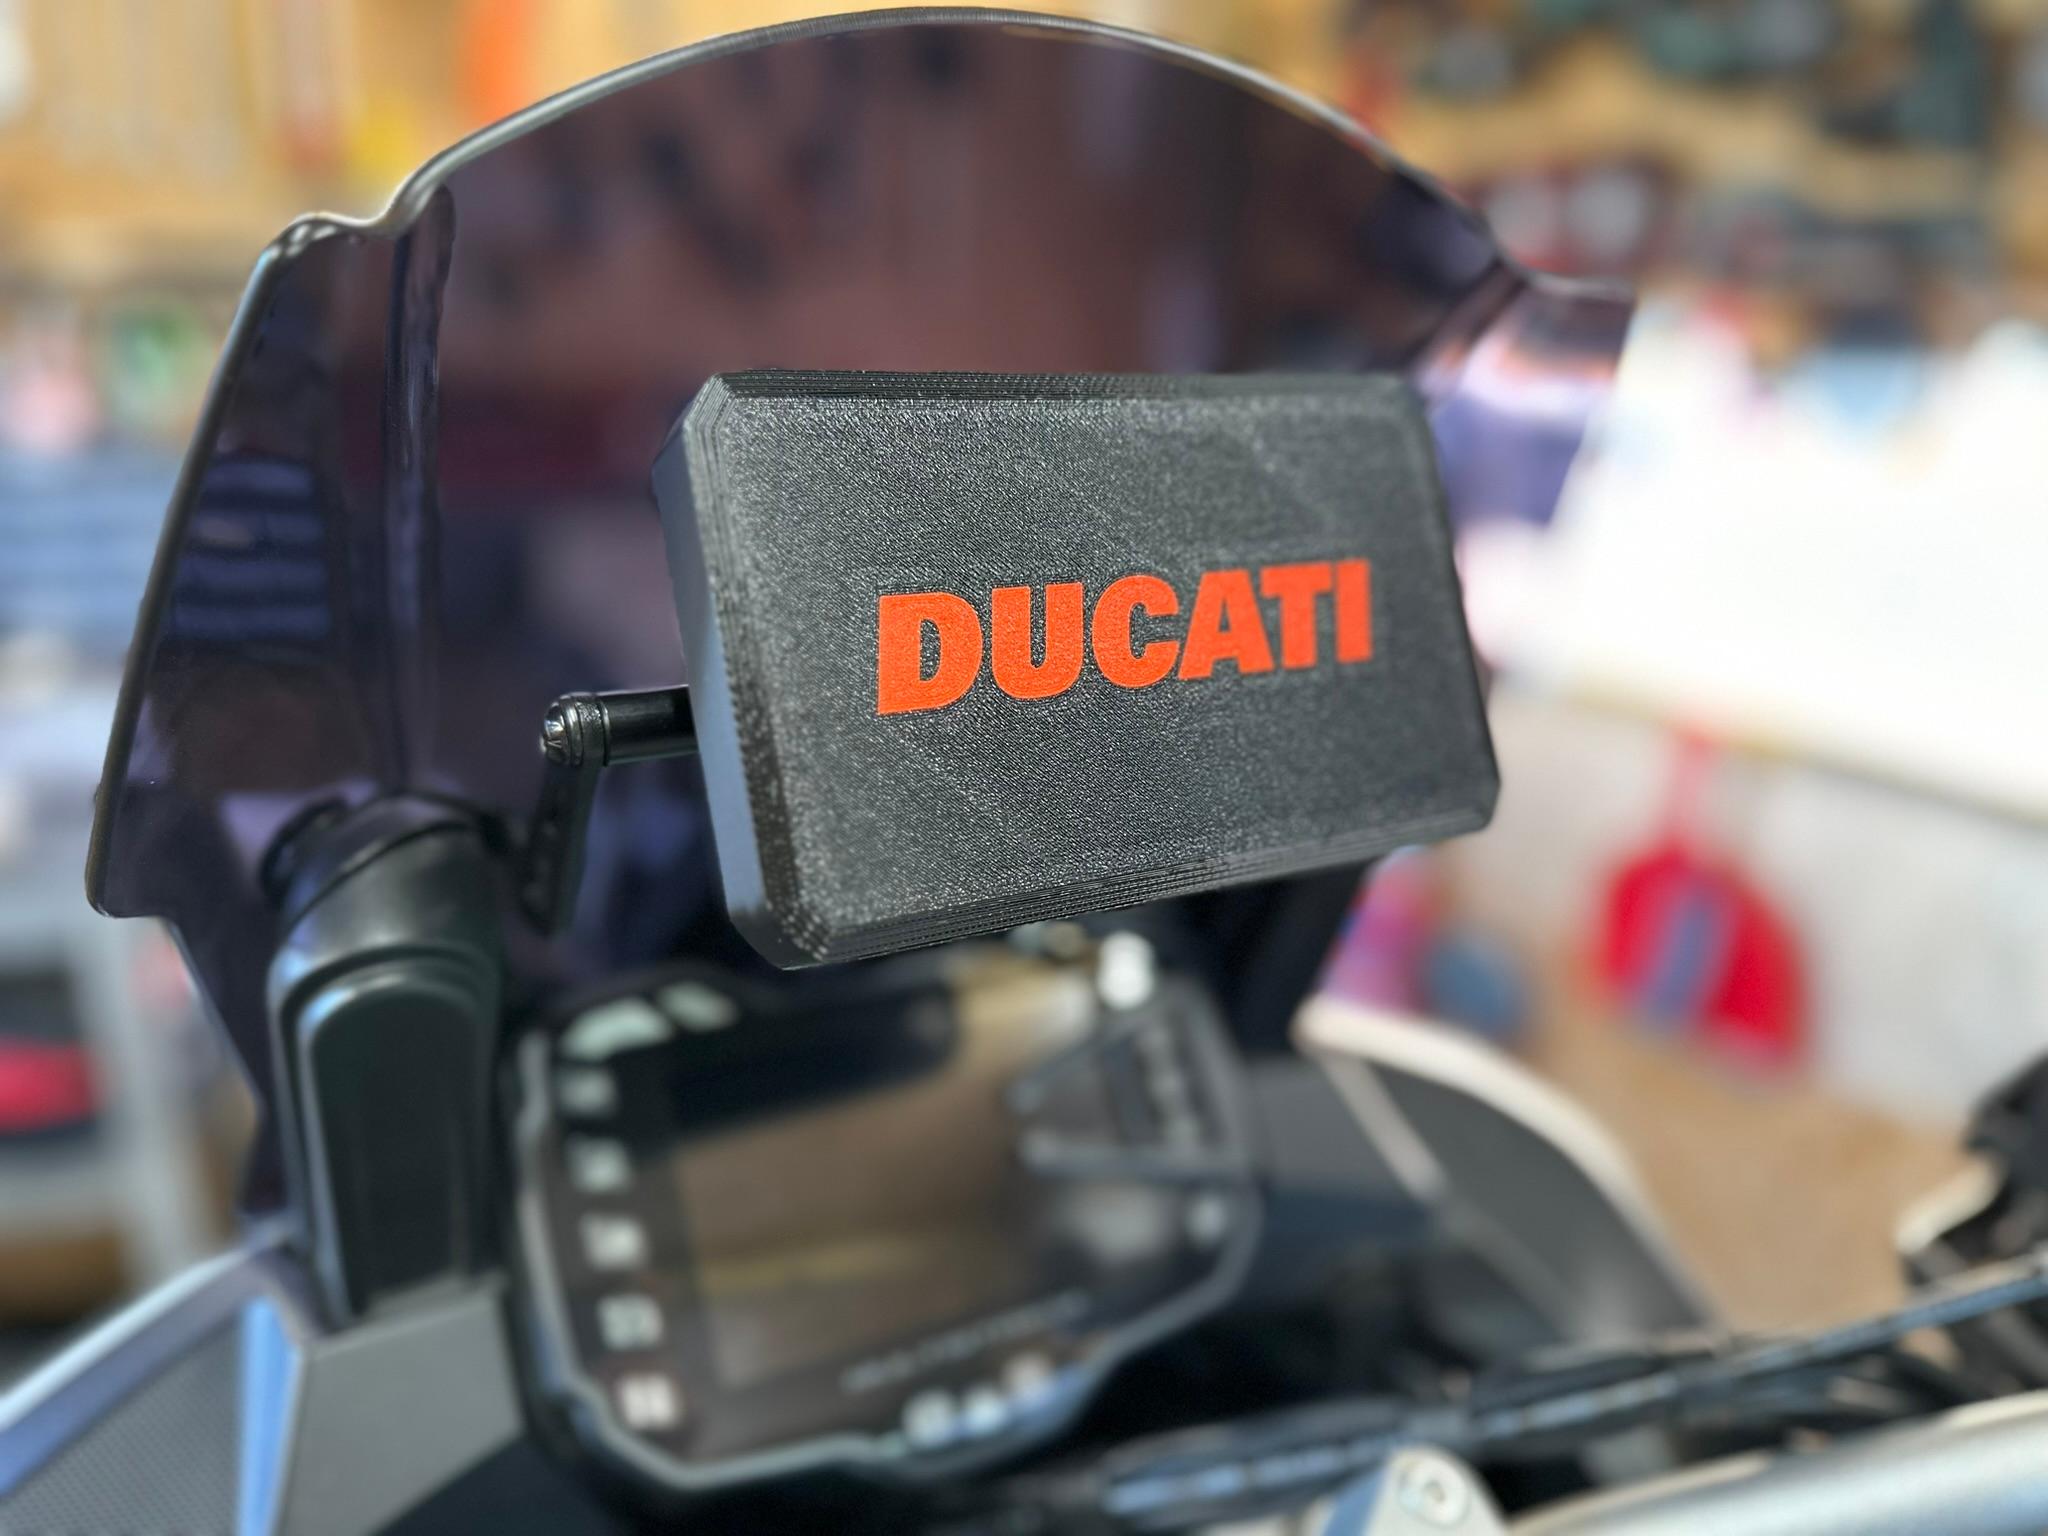 CHIGEE AIO-5 CARPLAY COVER DUCATI EDITION 3d model